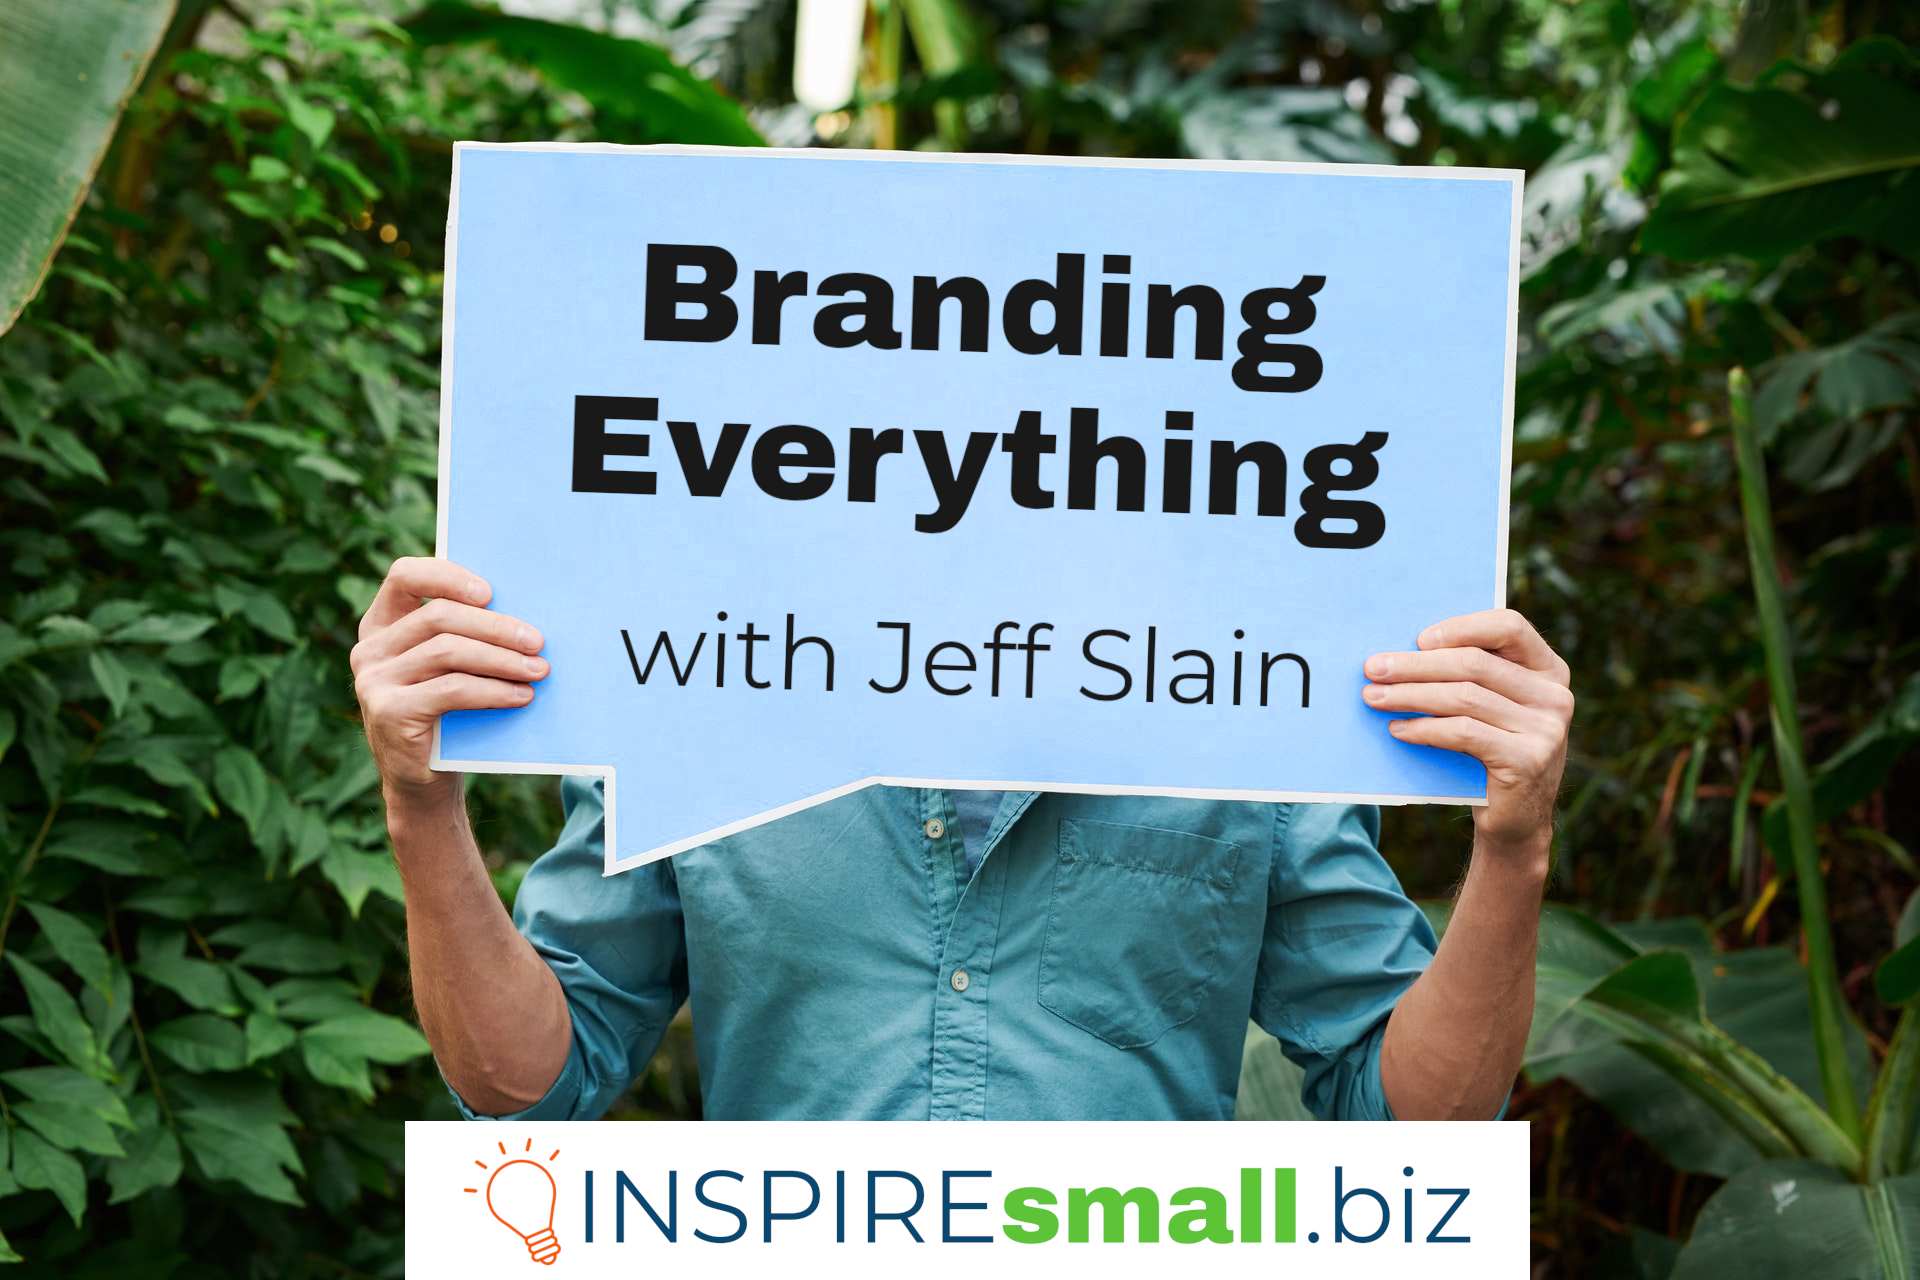 A person holding a sign in front of a background of green plants. The sign says Branding Everything with Jeff Slain, and a white card at the bottom that says INSPIREsmall.biz.